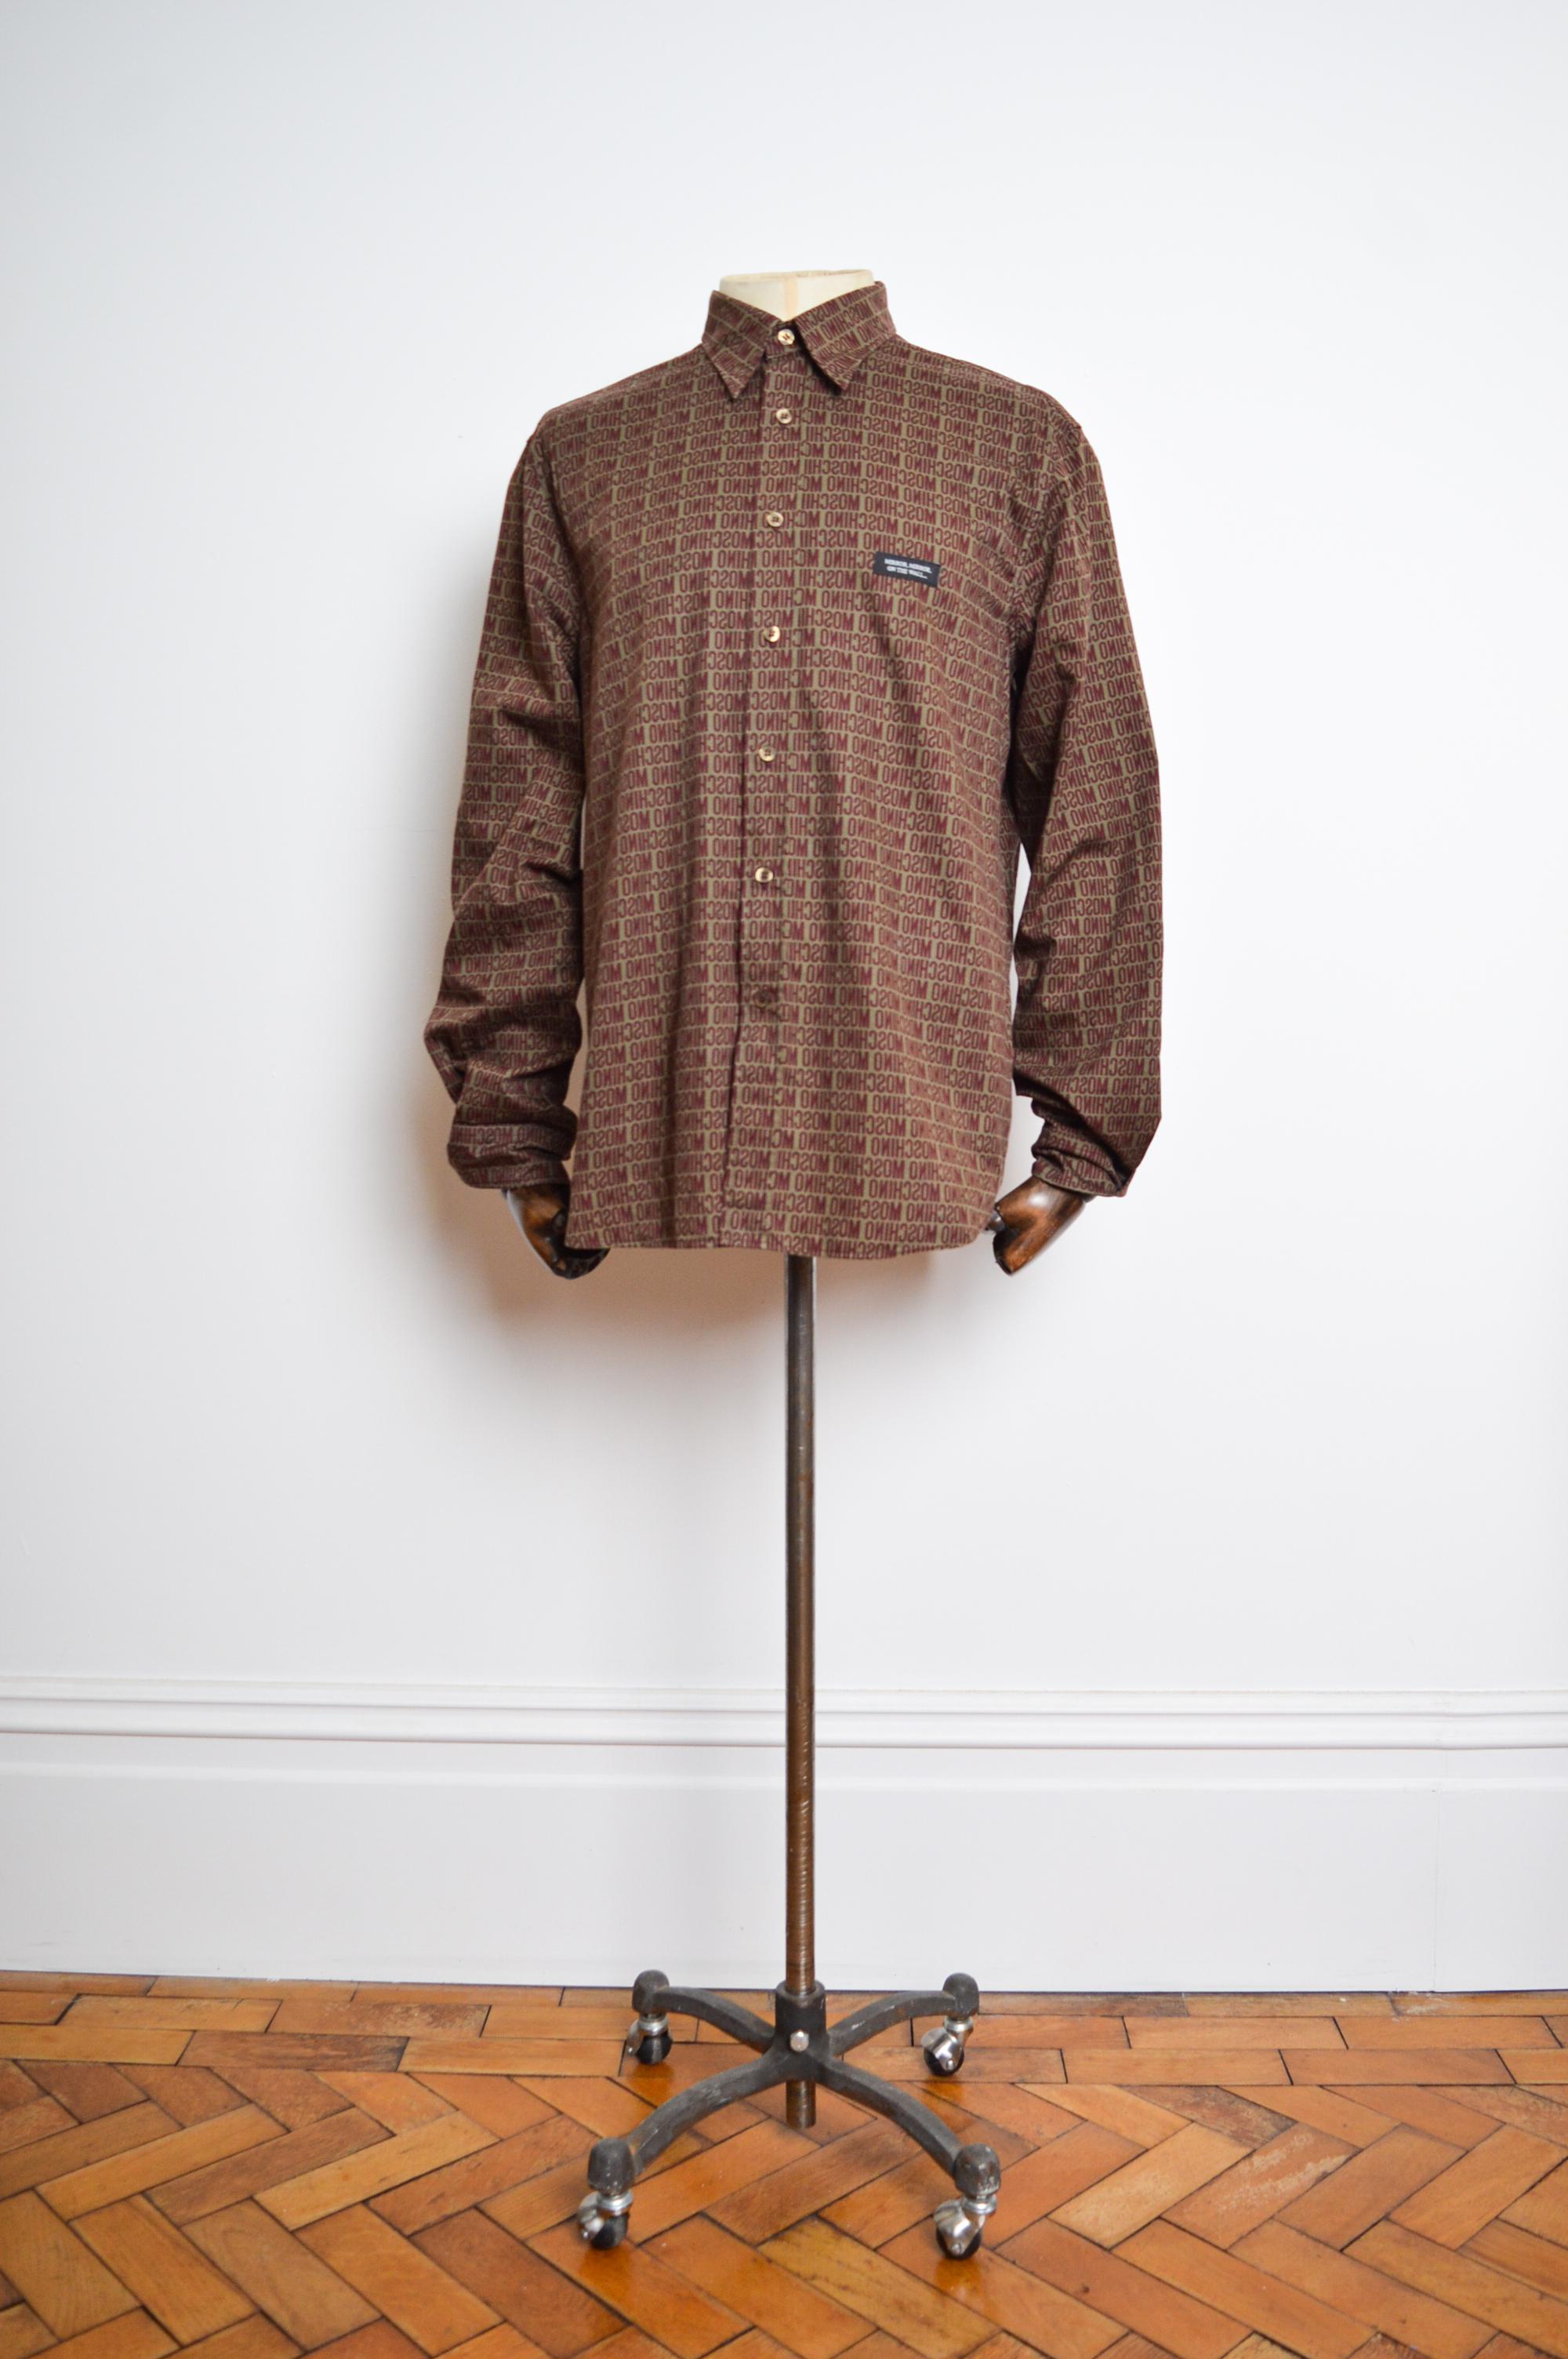 Early 2000's UK Garage Era 'MOSCHINO' repeat pattern Long sleeve Shirt, crafted from a printed cotton in Khaki green & Burgundy shades.

MADE IN ITALY.   

Features: Reverse mirror effect print, button down front , Collar, Long sleeves, cuffs,